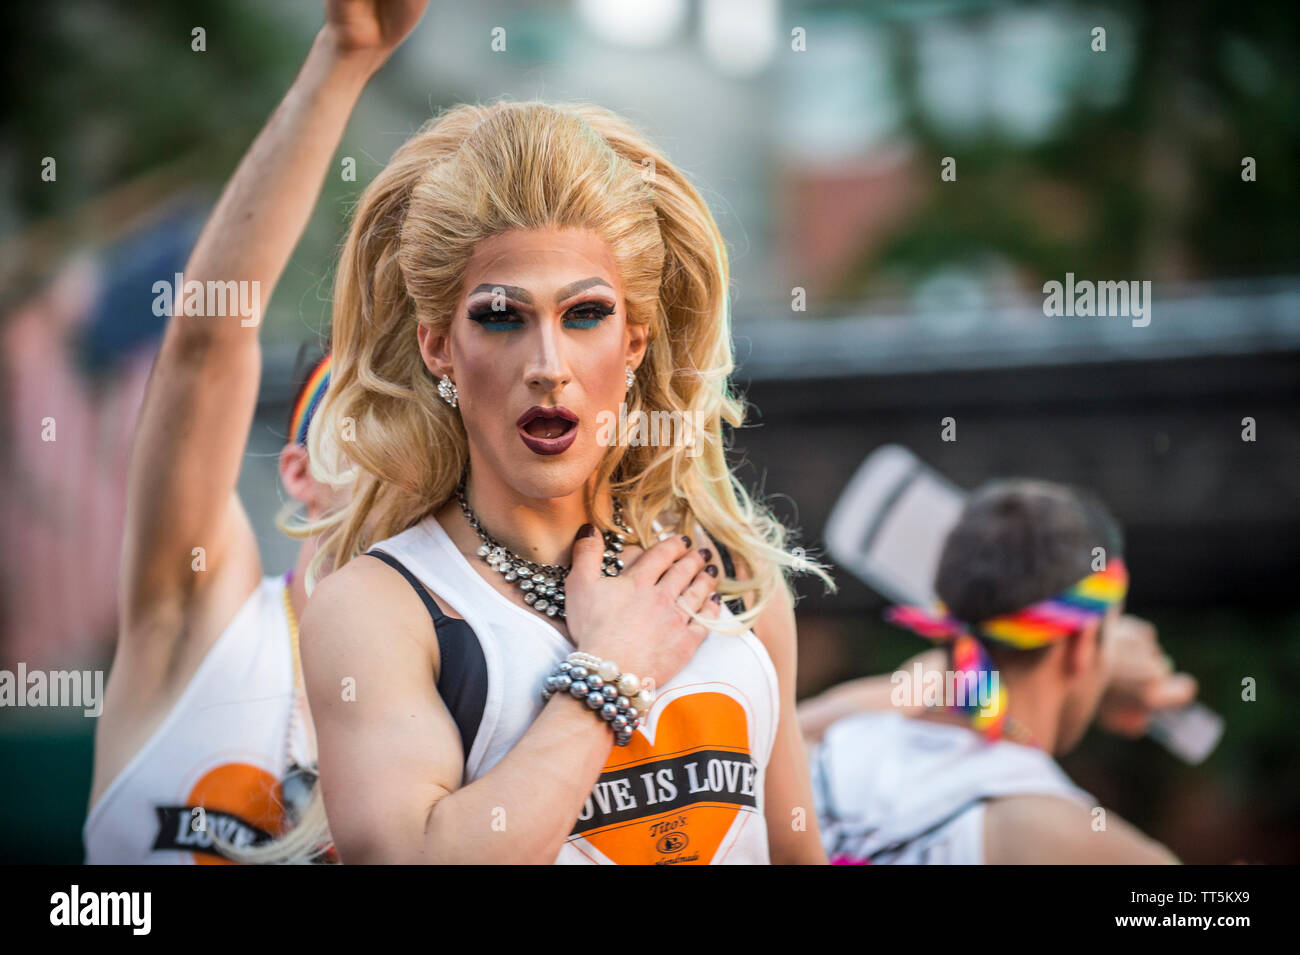 NEW YORK CITY - JUNE 25, 2017: A transgender drag performer with big hair wears a 'Love is Love' T-shirt on a float in the annual gay pride parade. Stock Photo